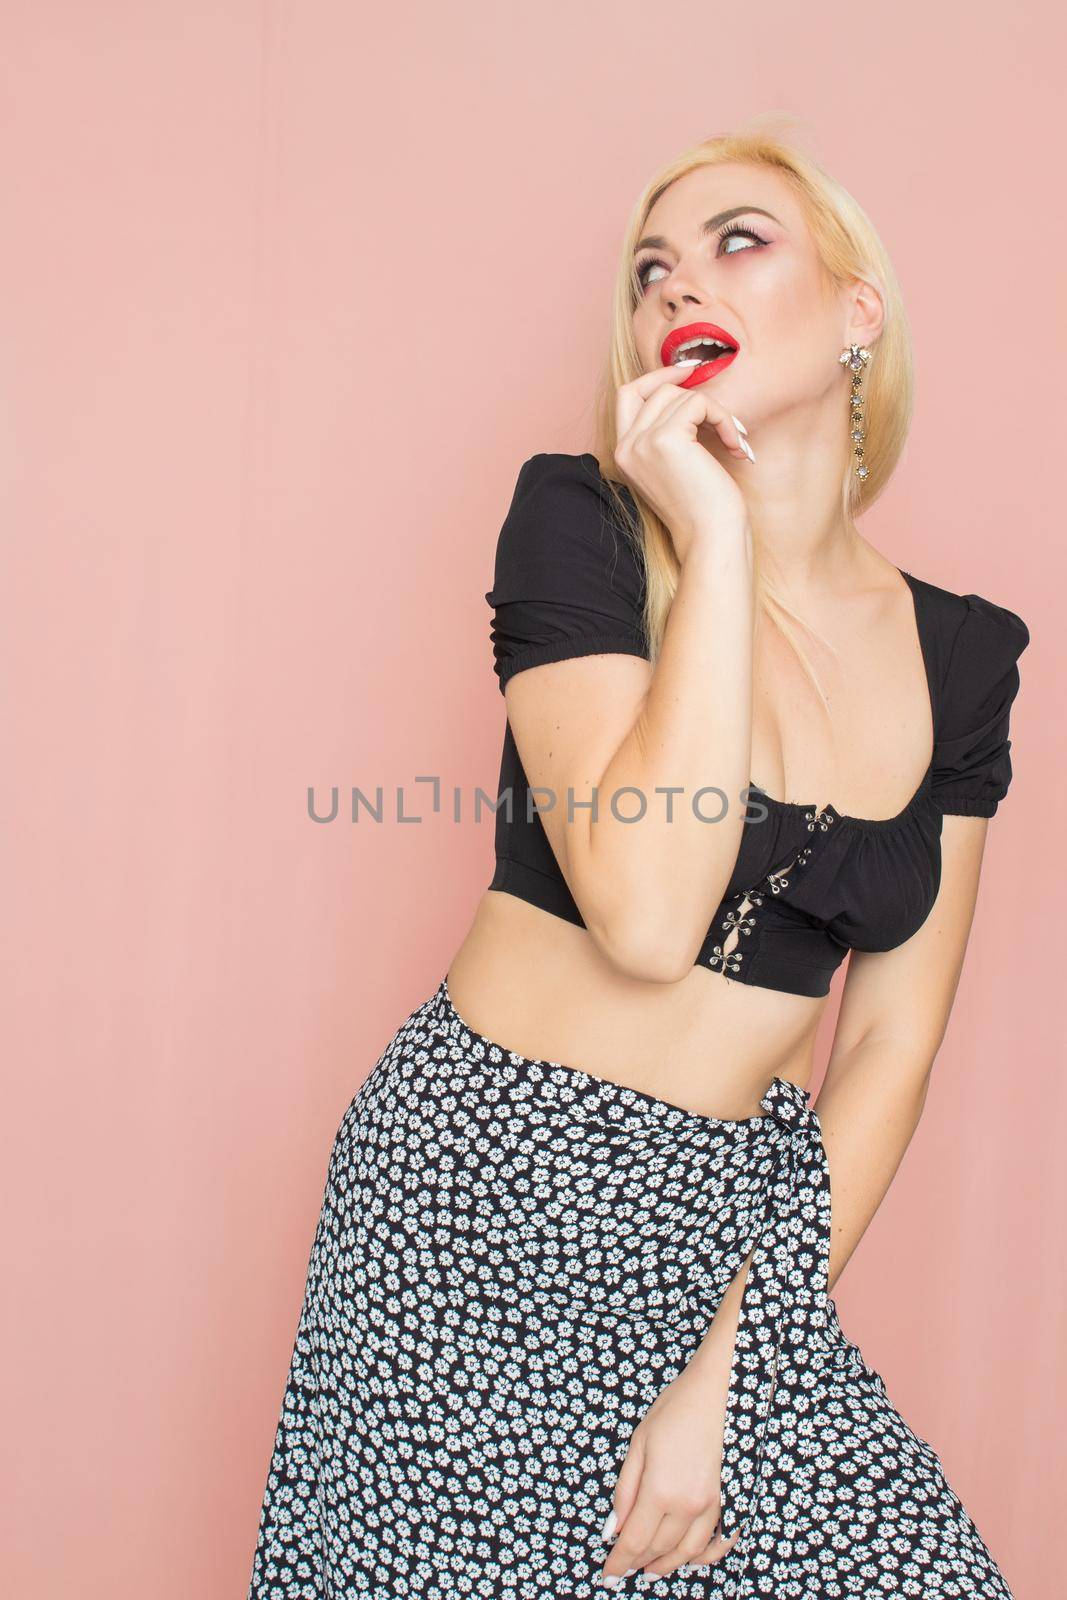 Summer fashion portrait blonde woman. Sexy look in black top and skirt. Red lips